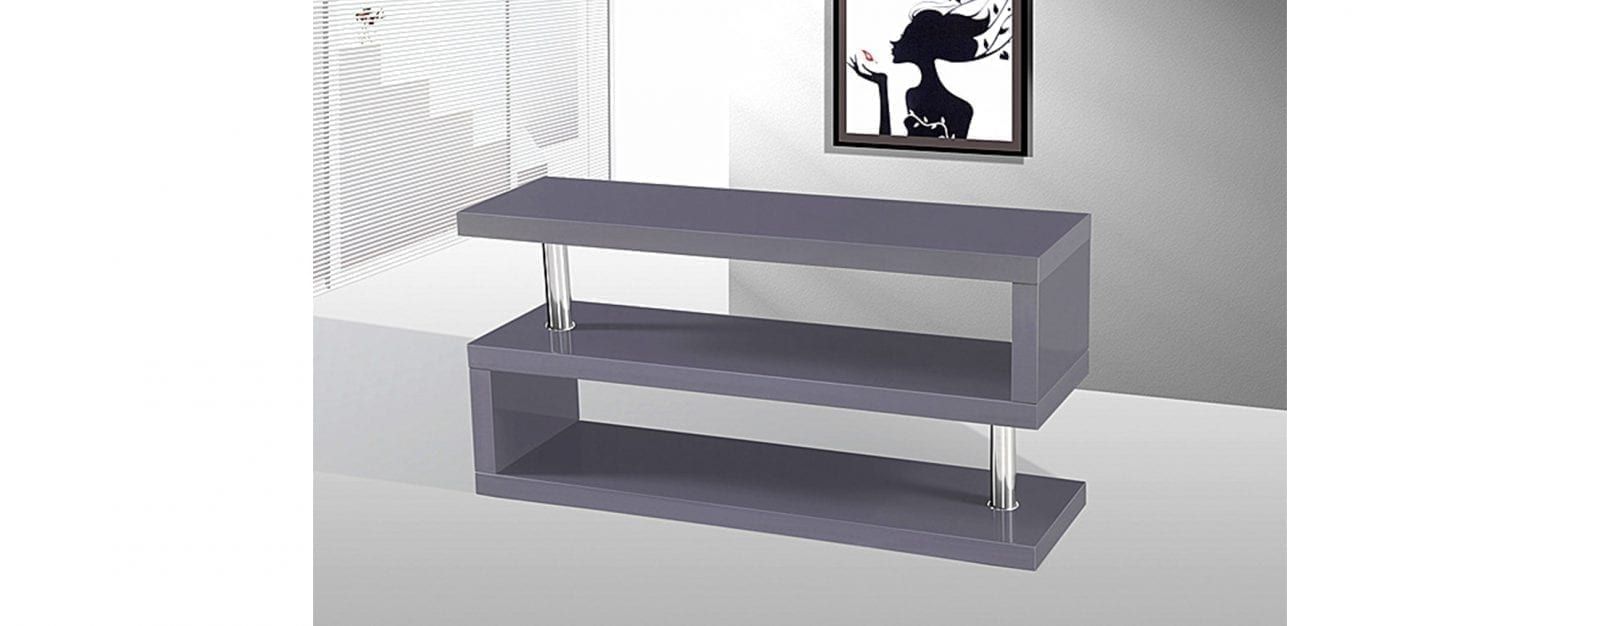 Charisma Tv Stand In Grey High Gloss | Allans Furniture Inside Charisma Tv Stands (View 10 of 20)